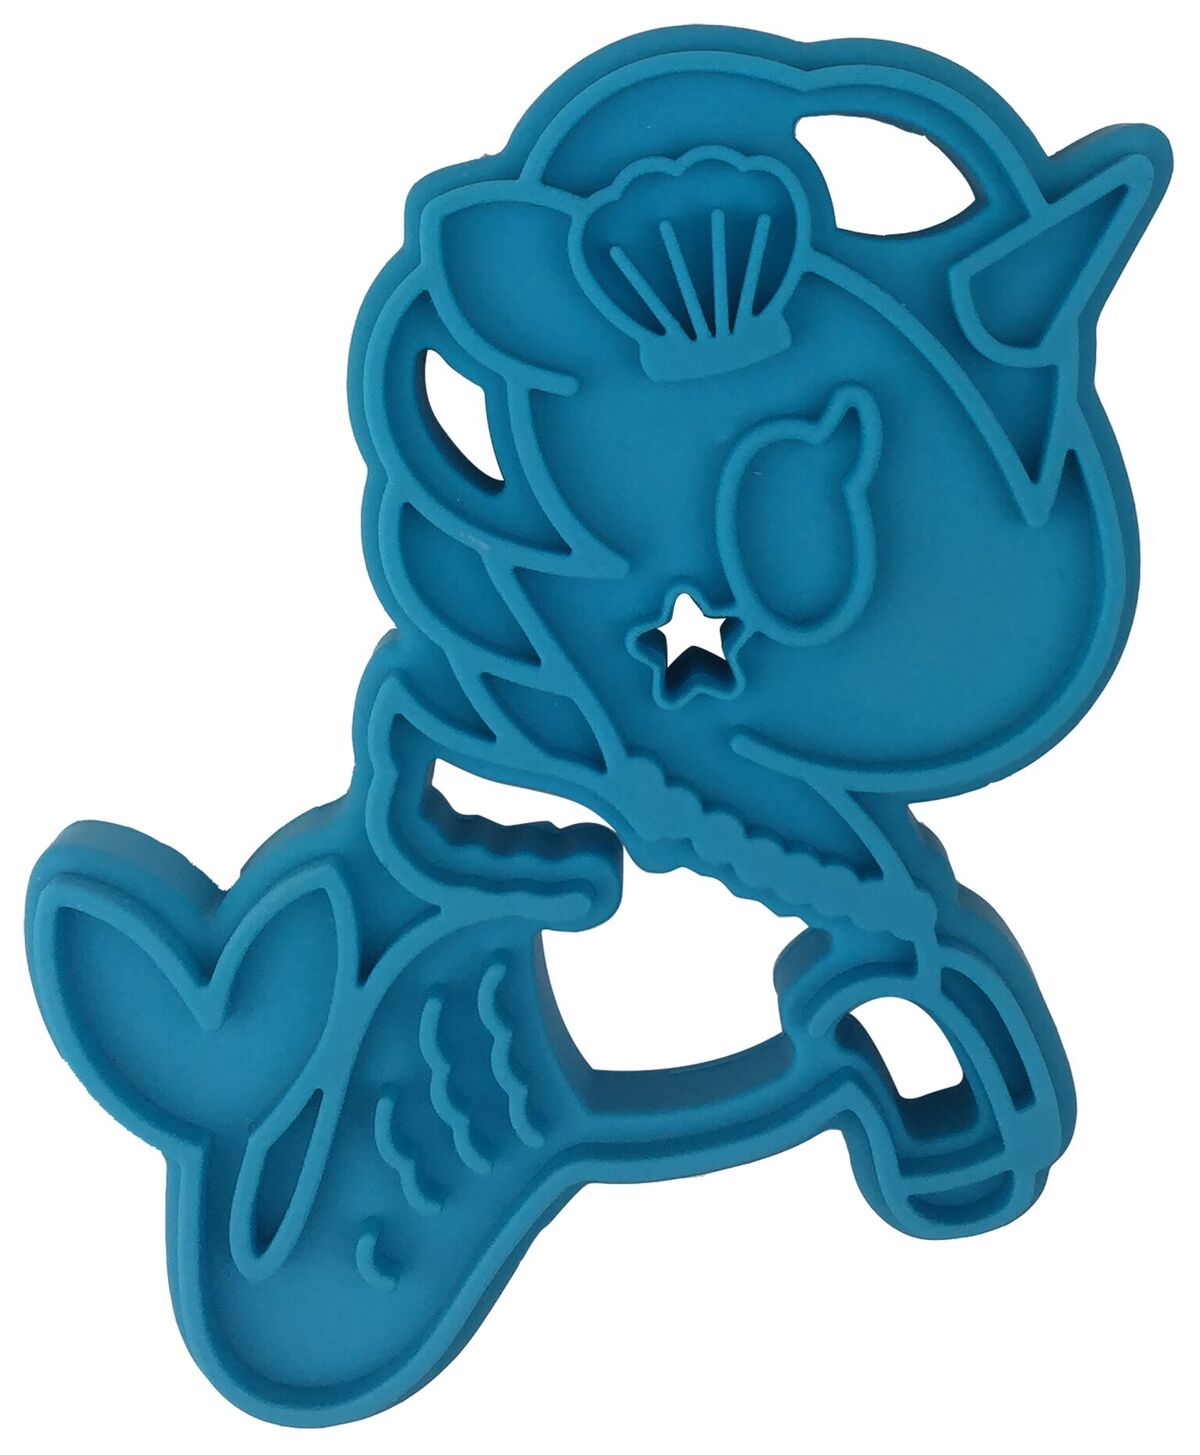 Itzy Ritzy Silicone Teethers